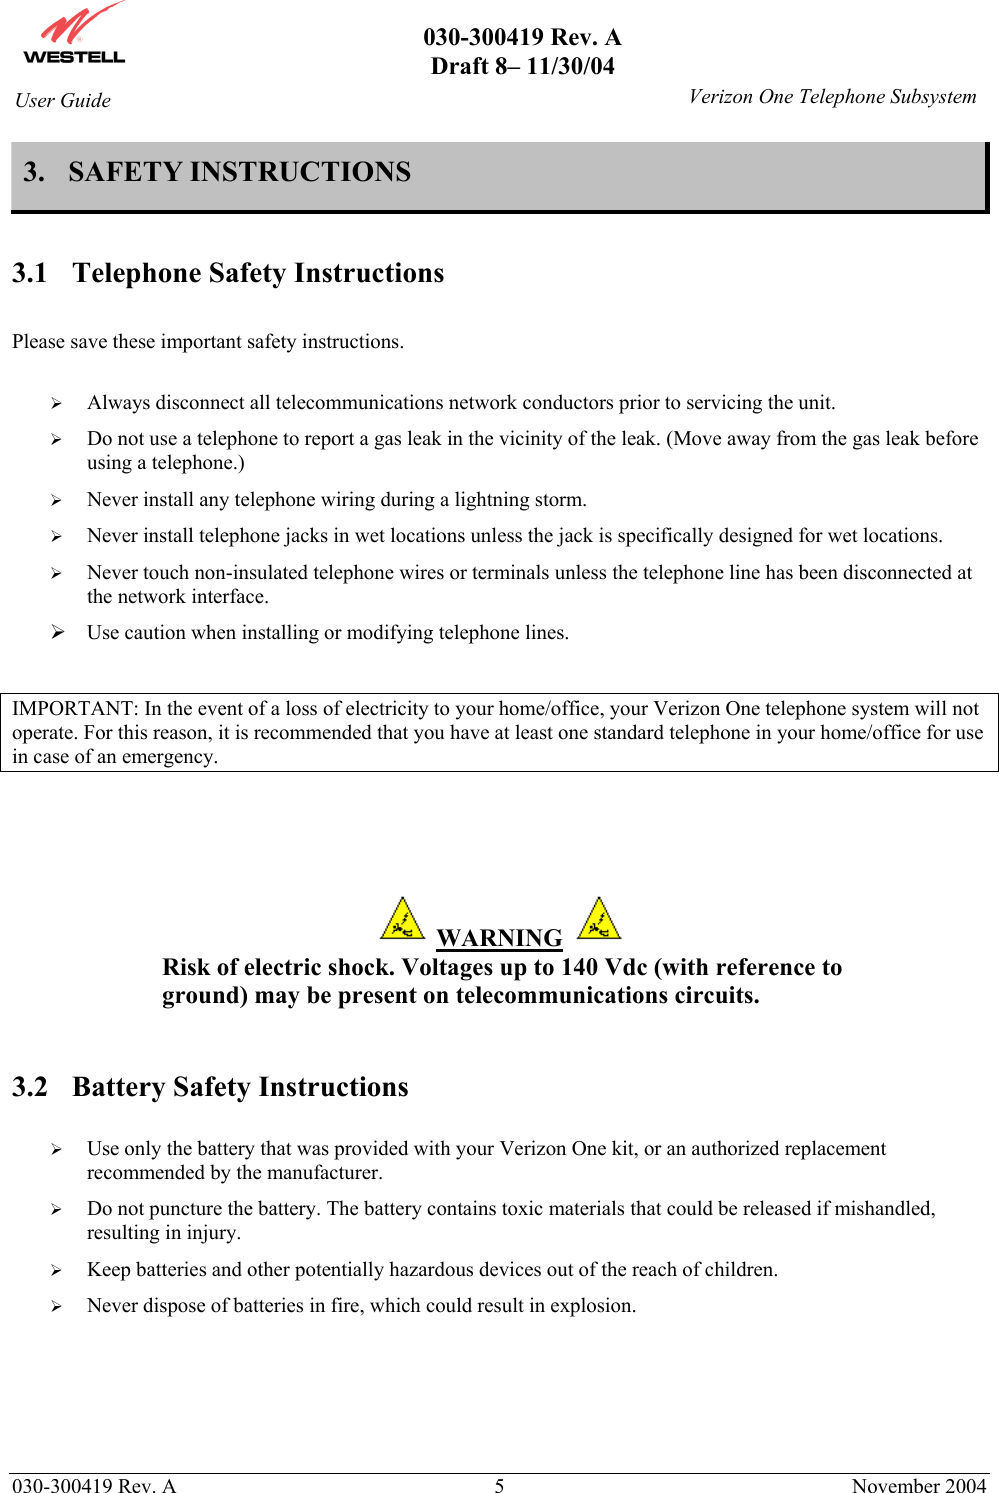       030-300419 Rev. A Draft 8– 11/30/04    030-300419 Rev. A  5  November 2004 User Guide   Verizon One Telephone Subsystem3. SAFETY INSTRUCTIONS  3.1  Telephone Safety Instructions  Please save these important safety instructions.    Always disconnect all telecommunications network conductors prior to servicing the unit.   Do not use a telephone to report a gas leak in the vicinity of the leak. (Move away from the gas leak before using a telephone.)   Never install any telephone wiring during a lightning storm.   Never install telephone jacks in wet locations unless the jack is specifically designed for wet locations.   Never touch non-insulated telephone wires or terminals unless the telephone line has been disconnected at the network interface.  Use caution when installing or modifying telephone lines.  IMPORTANT: In the event of a loss of electricity to your home/office, your Verizon One telephone system will not operate. For this reason, it is recommended that you have at least one standard telephone in your home/office for use in case of an emergency.     WARNING   Risk of electric shock. Voltages up to 140 Vdc (with reference to ground) may be present on telecommunications circuits.   3.2  Battery Safety Instructions    Use only the battery that was provided with your Verizon One kit, or an authorized replacement recommended by the manufacturer.   Do not puncture the battery. The battery contains toxic materials that could be released if mishandled, resulting in injury.   Keep batteries and other potentially hazardous devices out of the reach of children.   Never dispose of batteries in fire, which could result in explosion.   